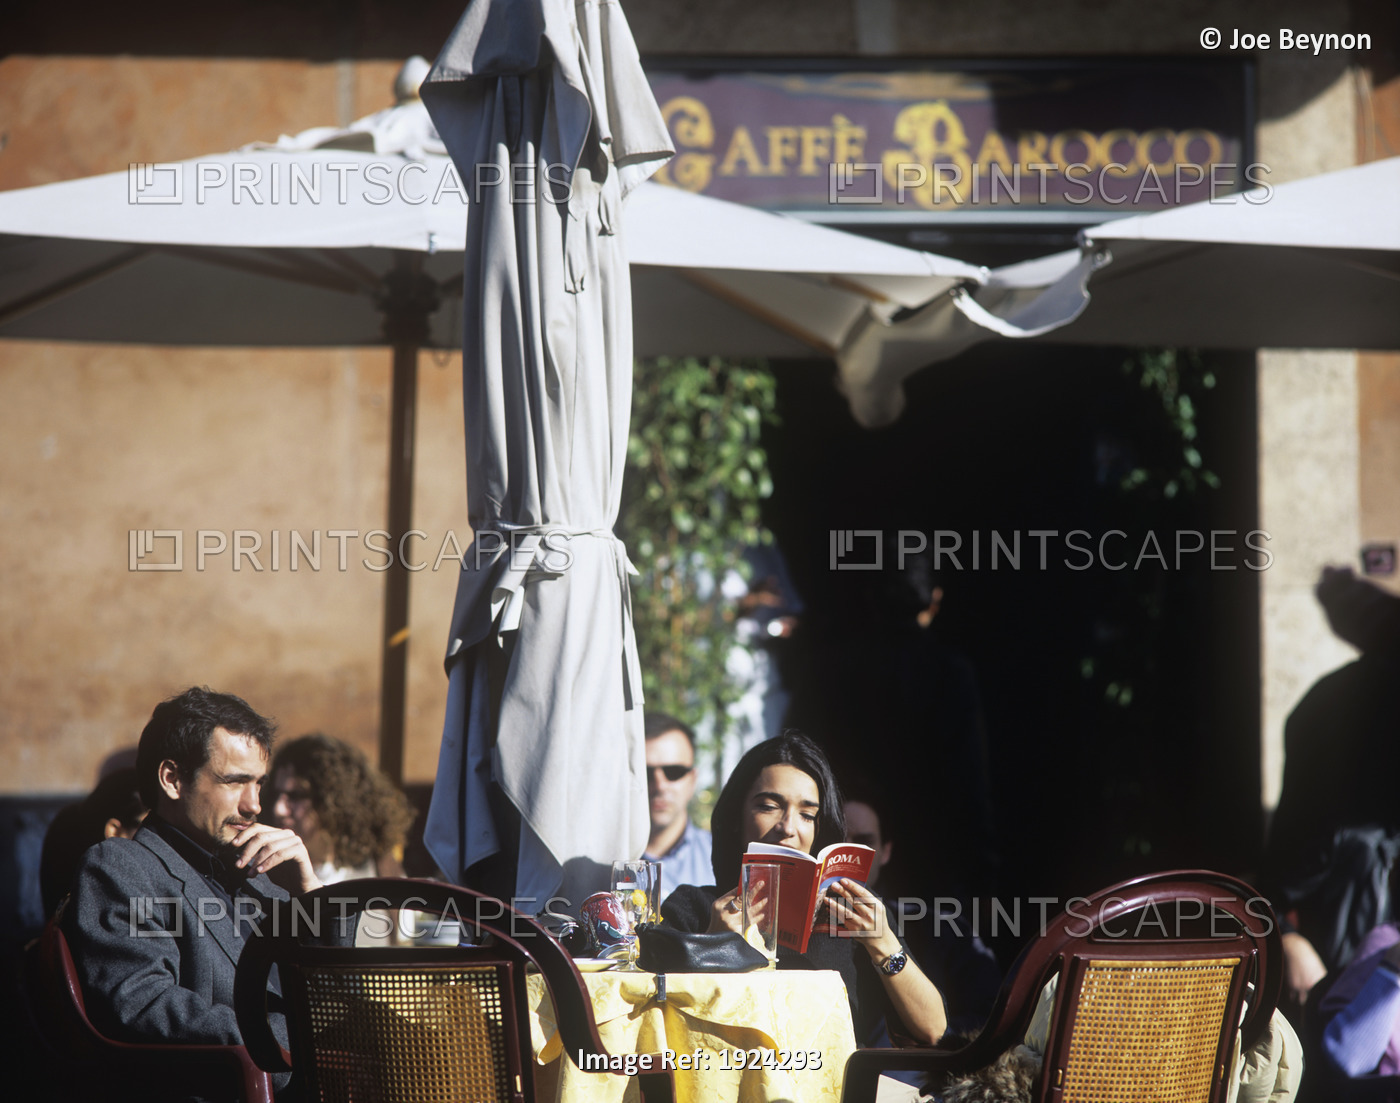 Italian Tourists At Cafe In Piazza Navona, Reading Guide Books